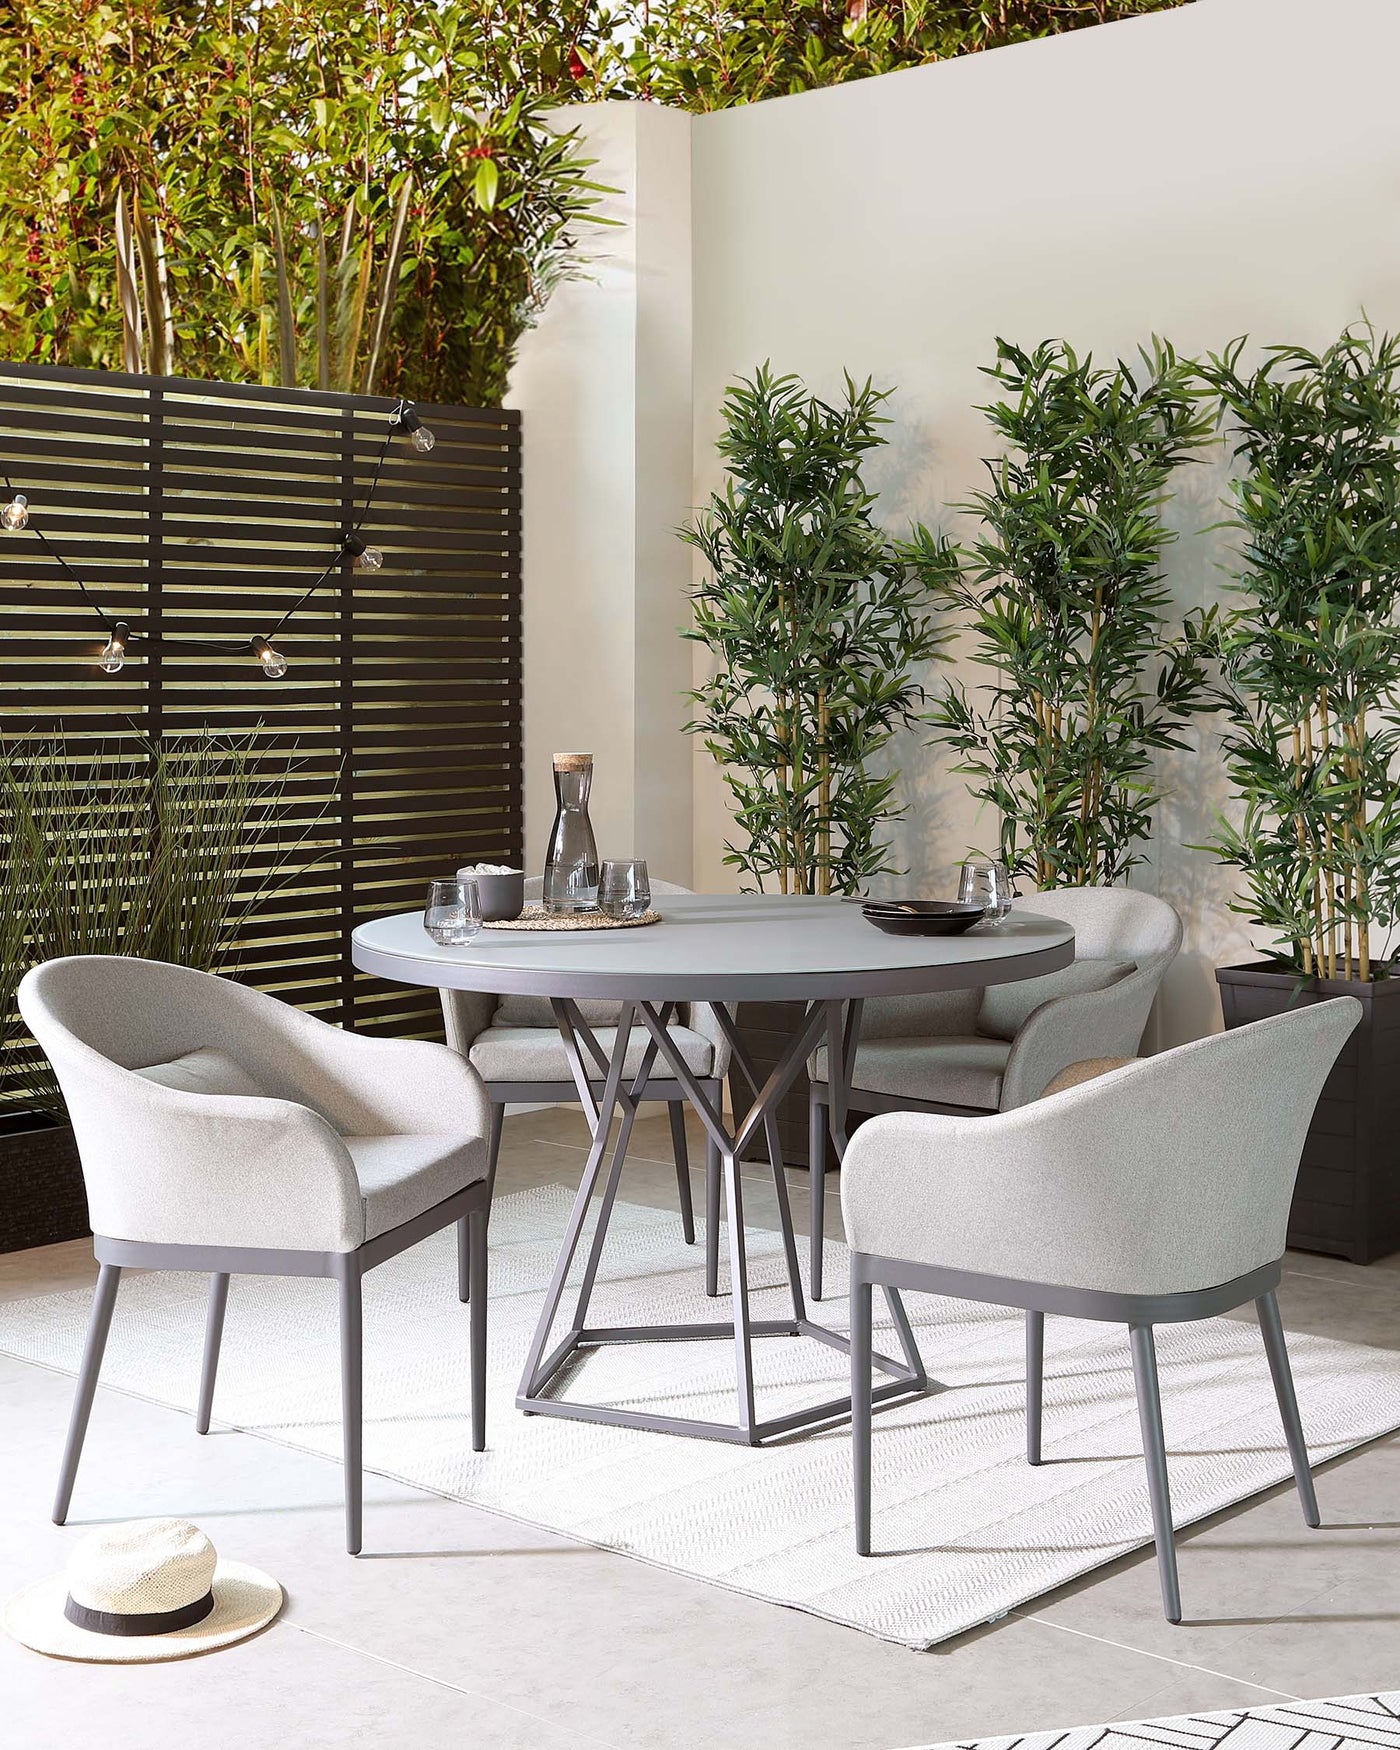 Modern outdoor dining set featuring a round, grey tabletop with a geometric metal base and four comfortable armchairs upholstered in light grey fabric with sleek metal legs.